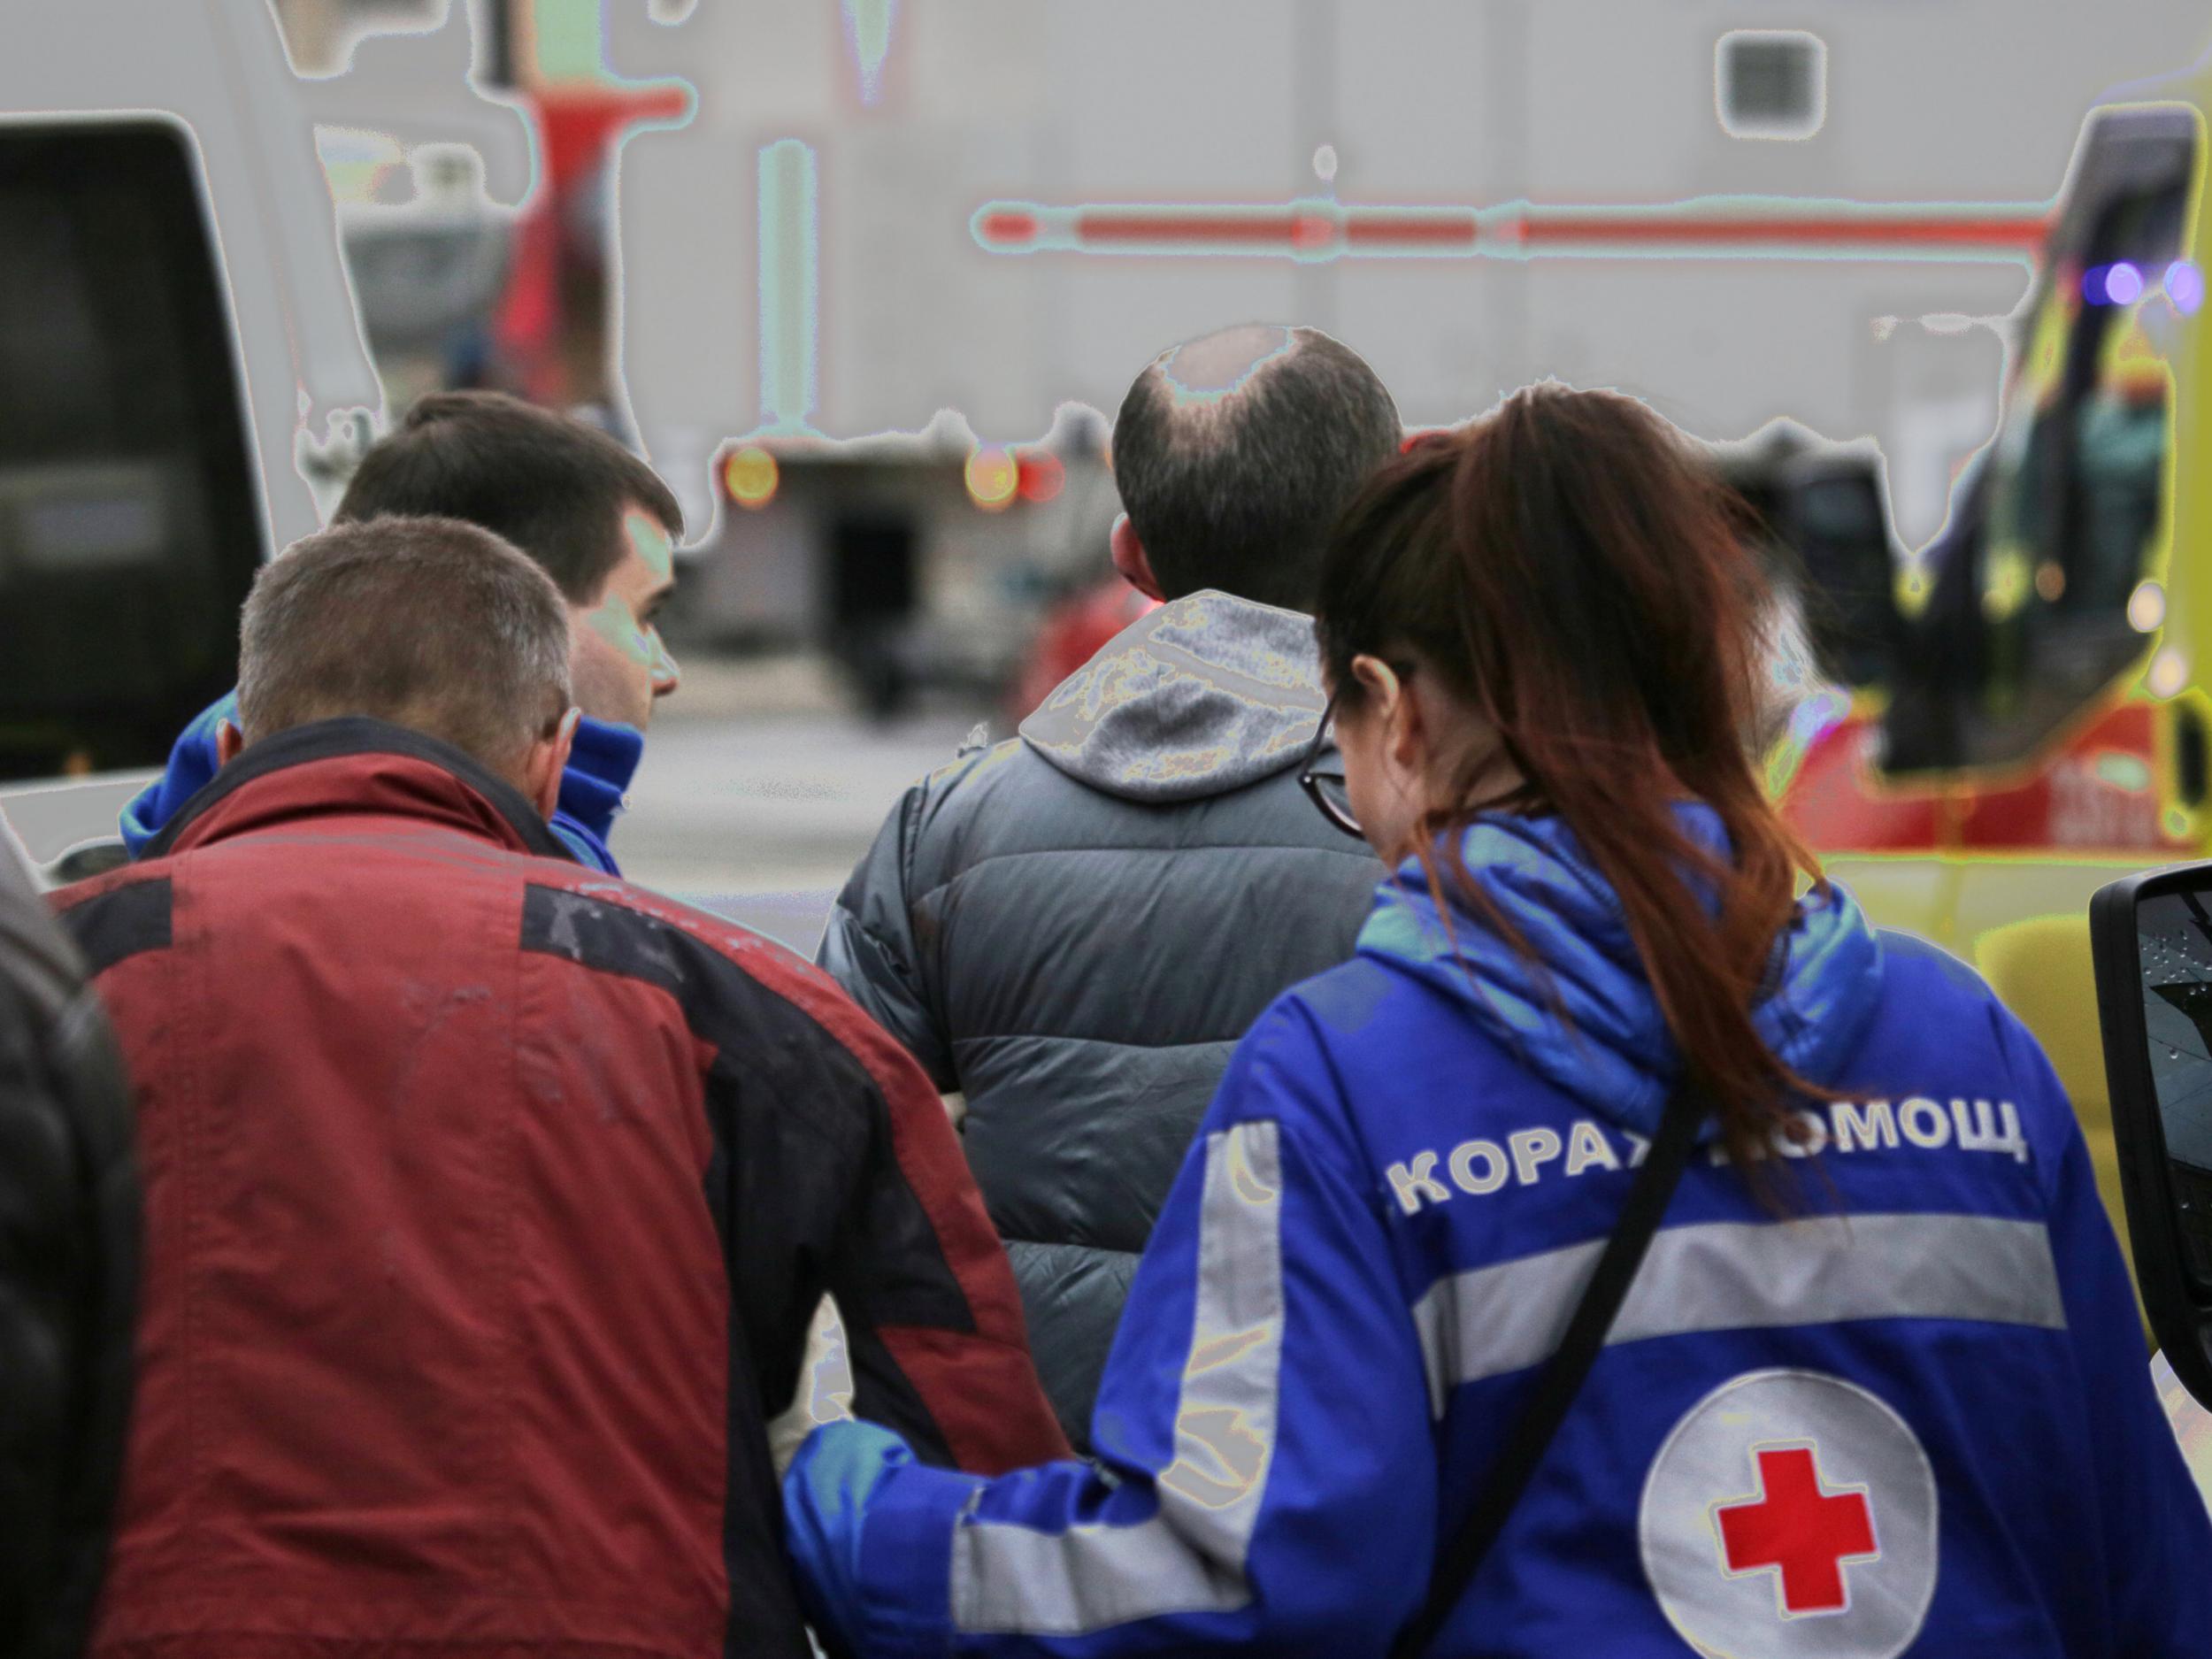 An injured person is helped by emergency services outside Sennaya Ploshchad metro station